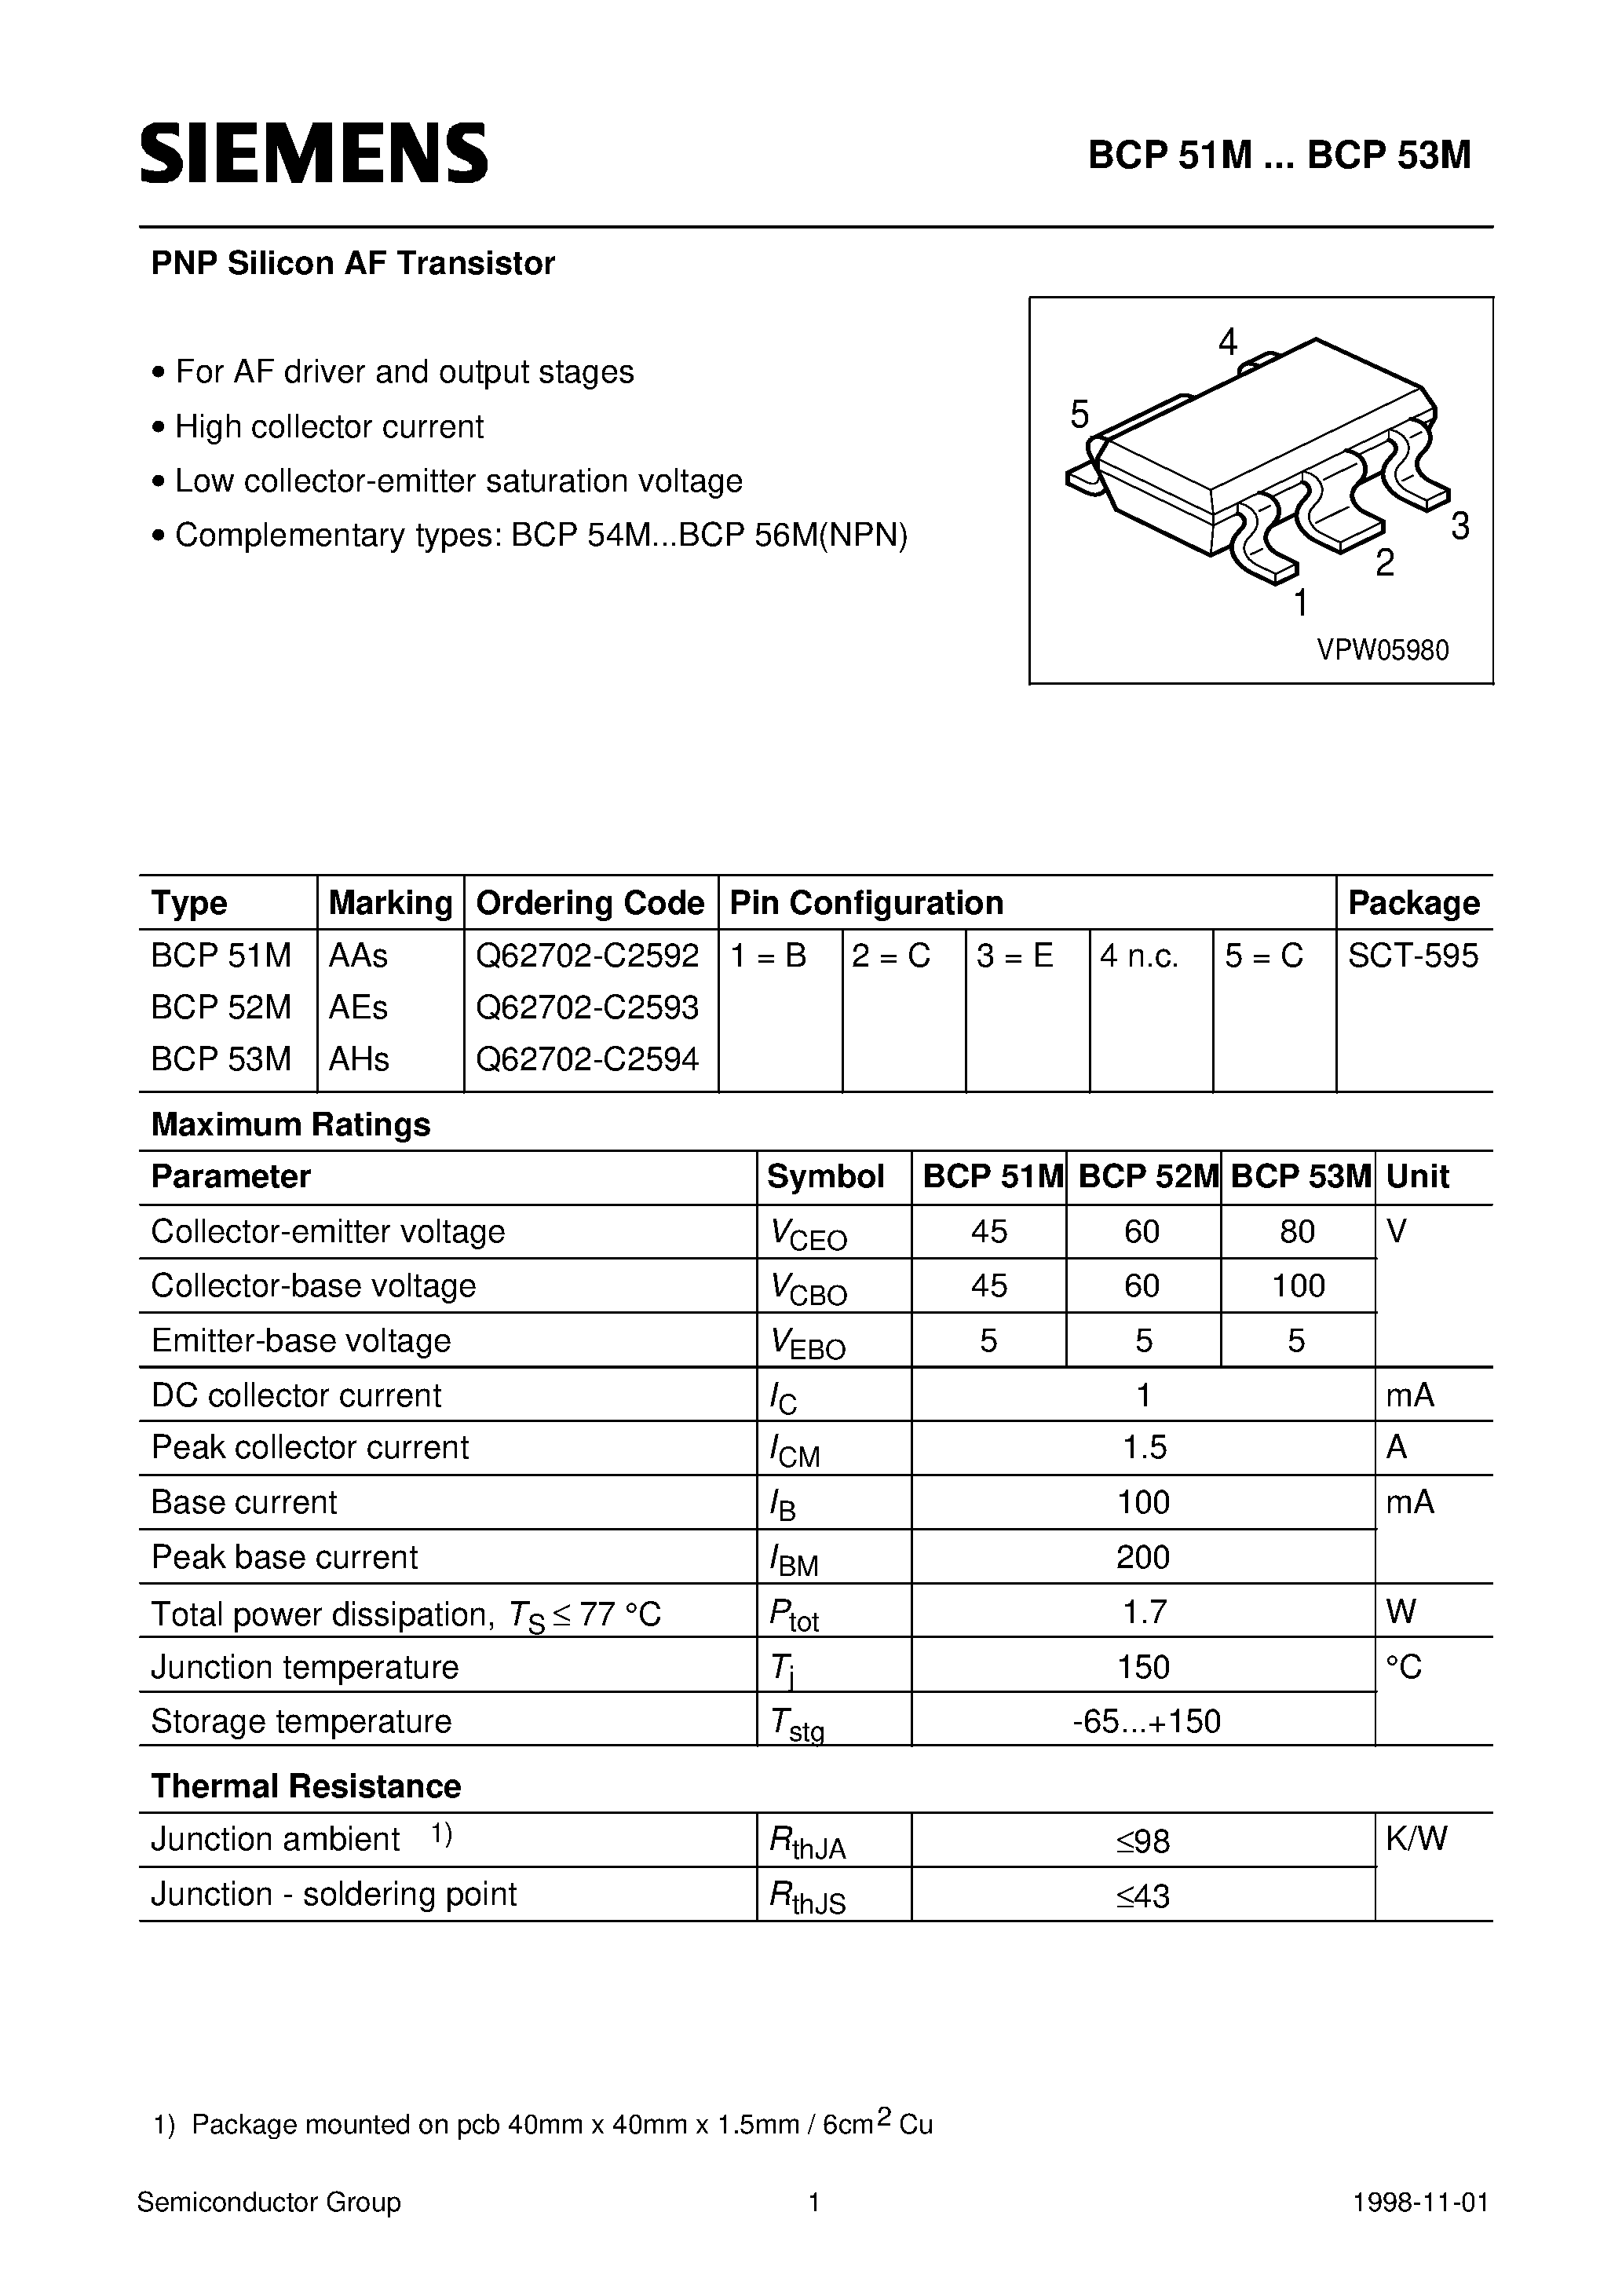 Datasheet BCP51M - PNP Silicon AF Transistor (For AF driver and output stages High collector current) page 1